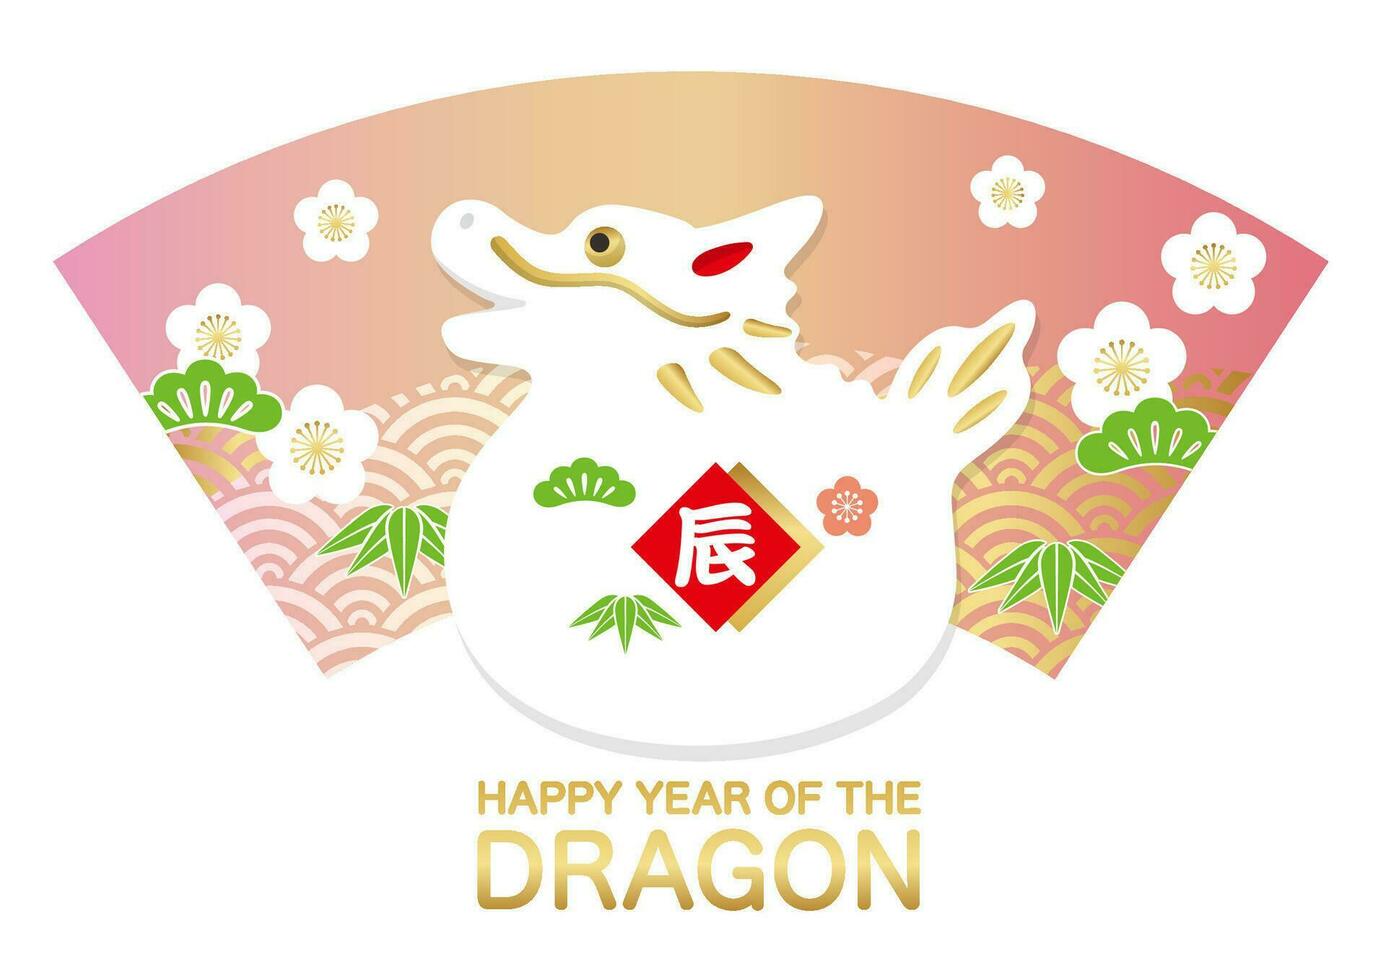 The Year Of The Dragon Zodiac Symbol With Japanese Vintage Pattern Isolated On A White Background. Vector Illustration. Kanji Translation - The Dragon.